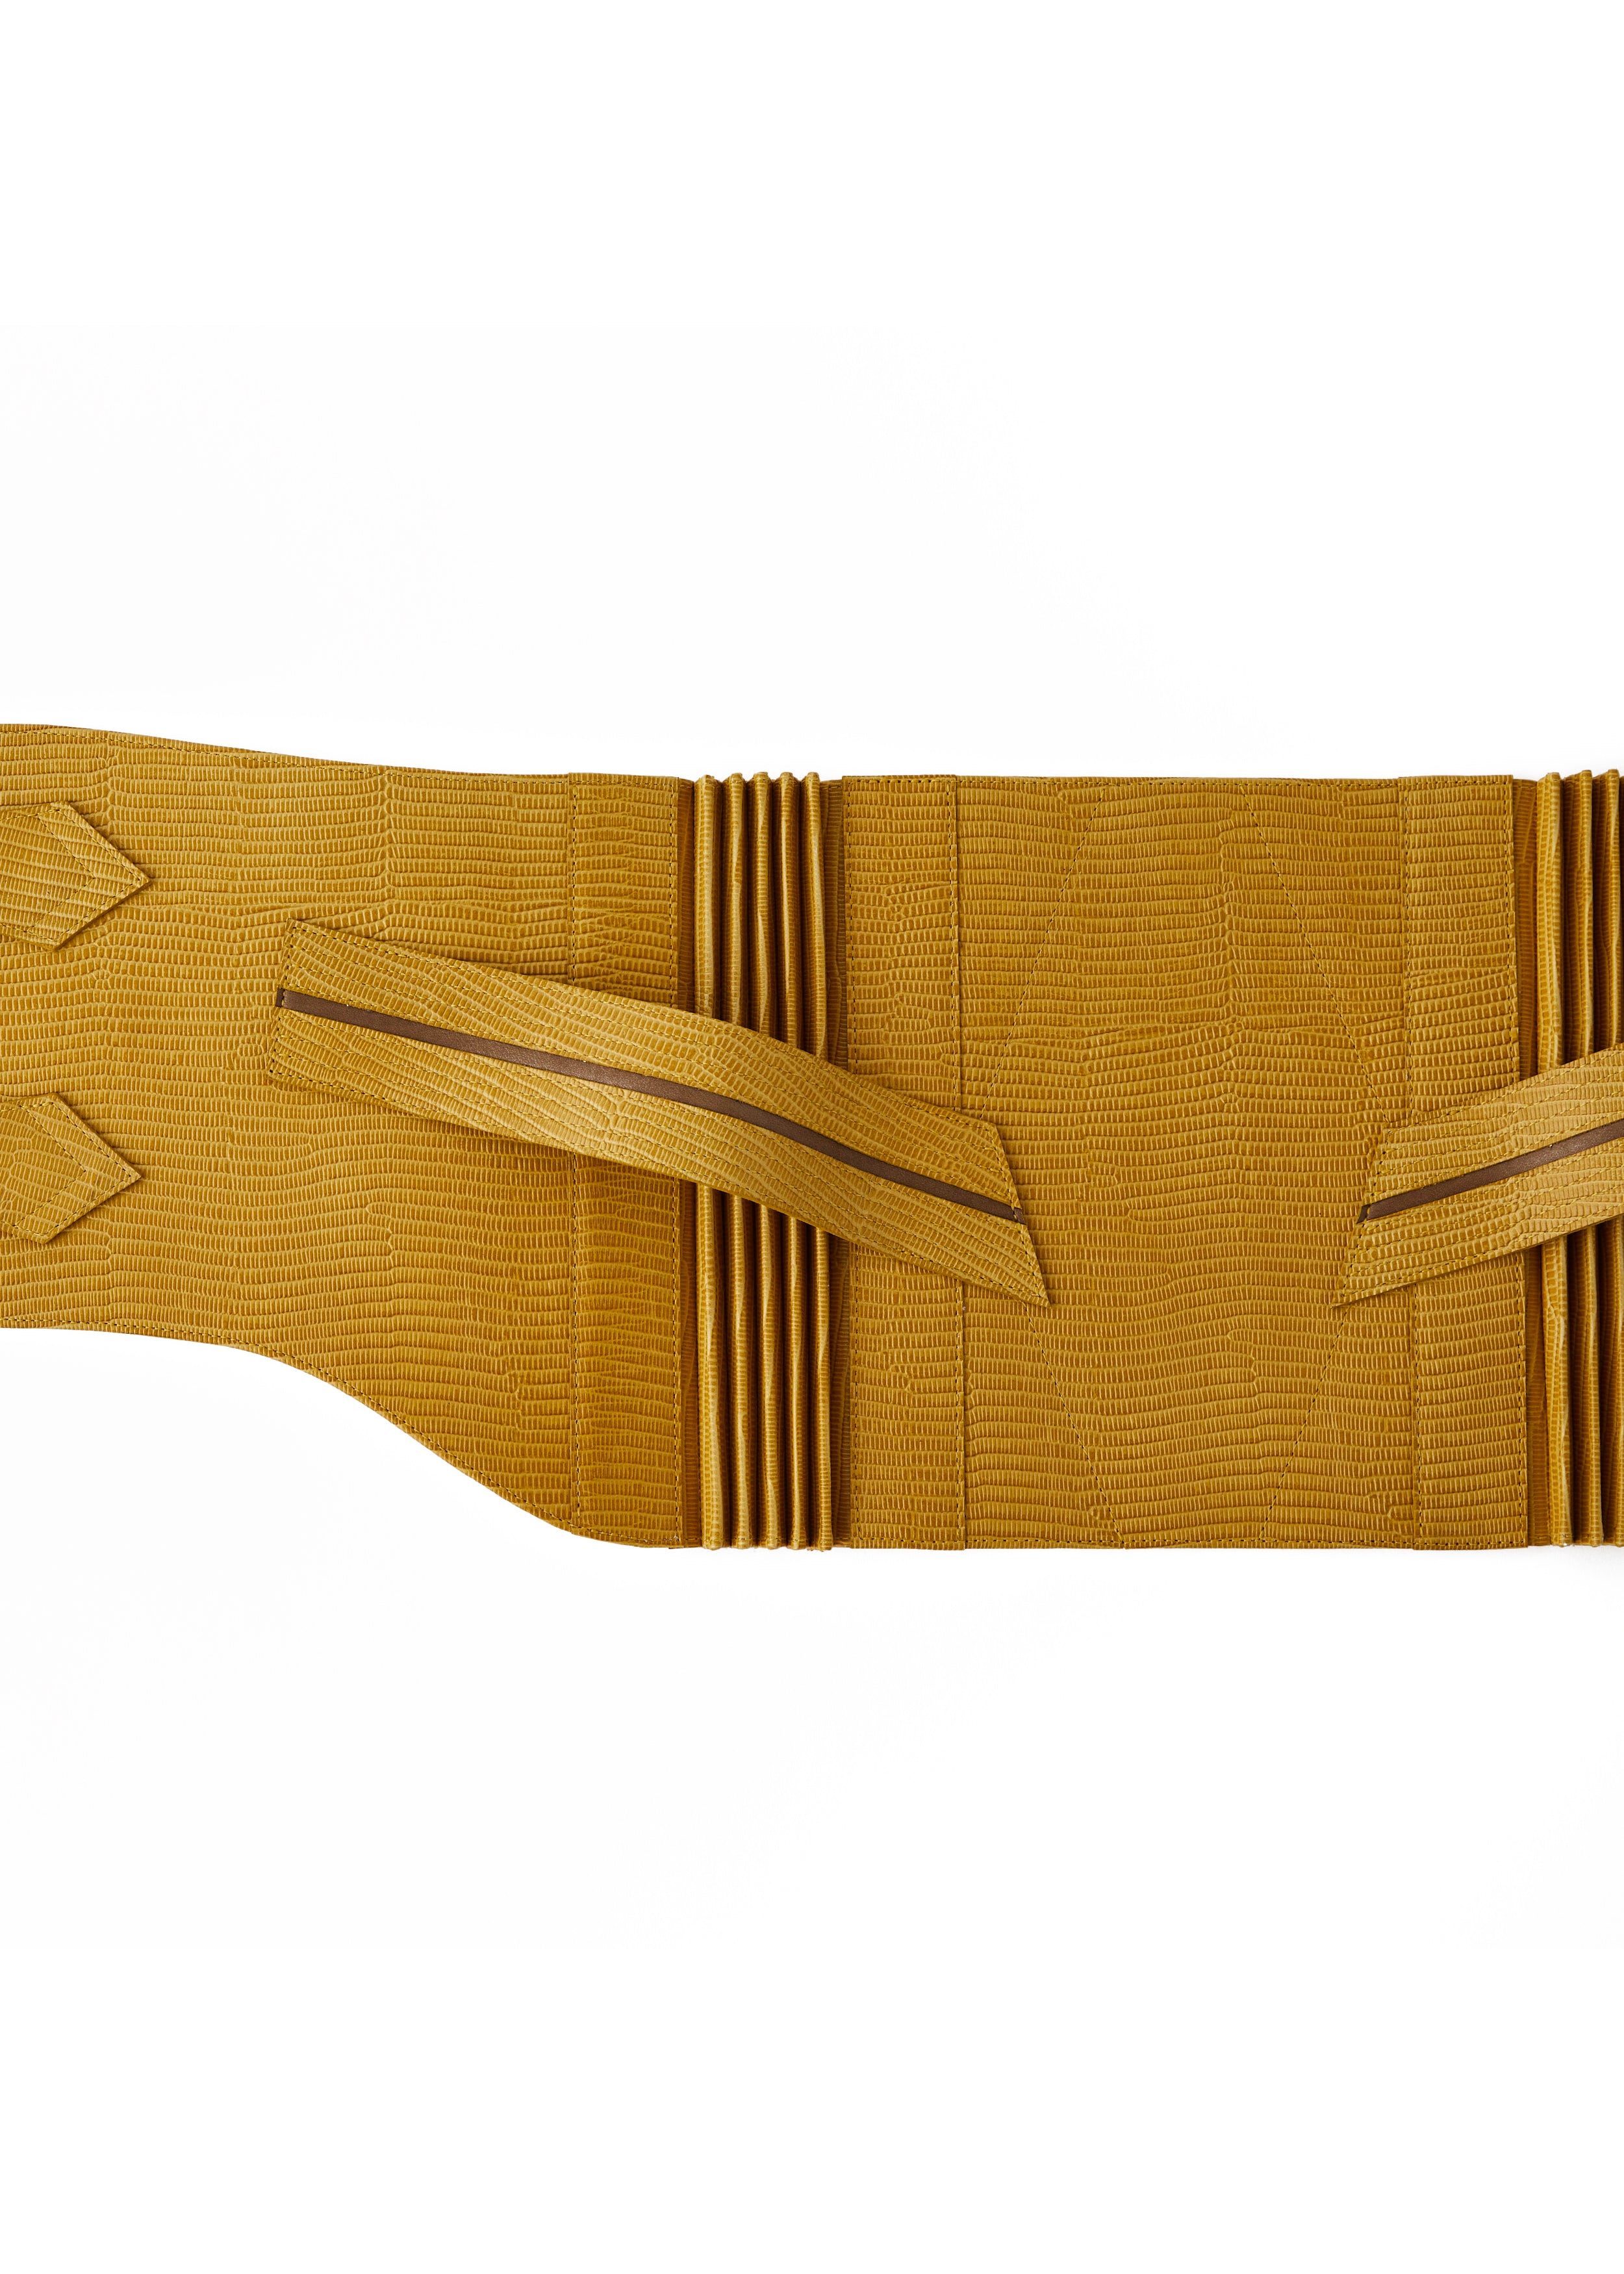 Obi Belt "Lizard Mustard" Leather [Immediate delivery available]